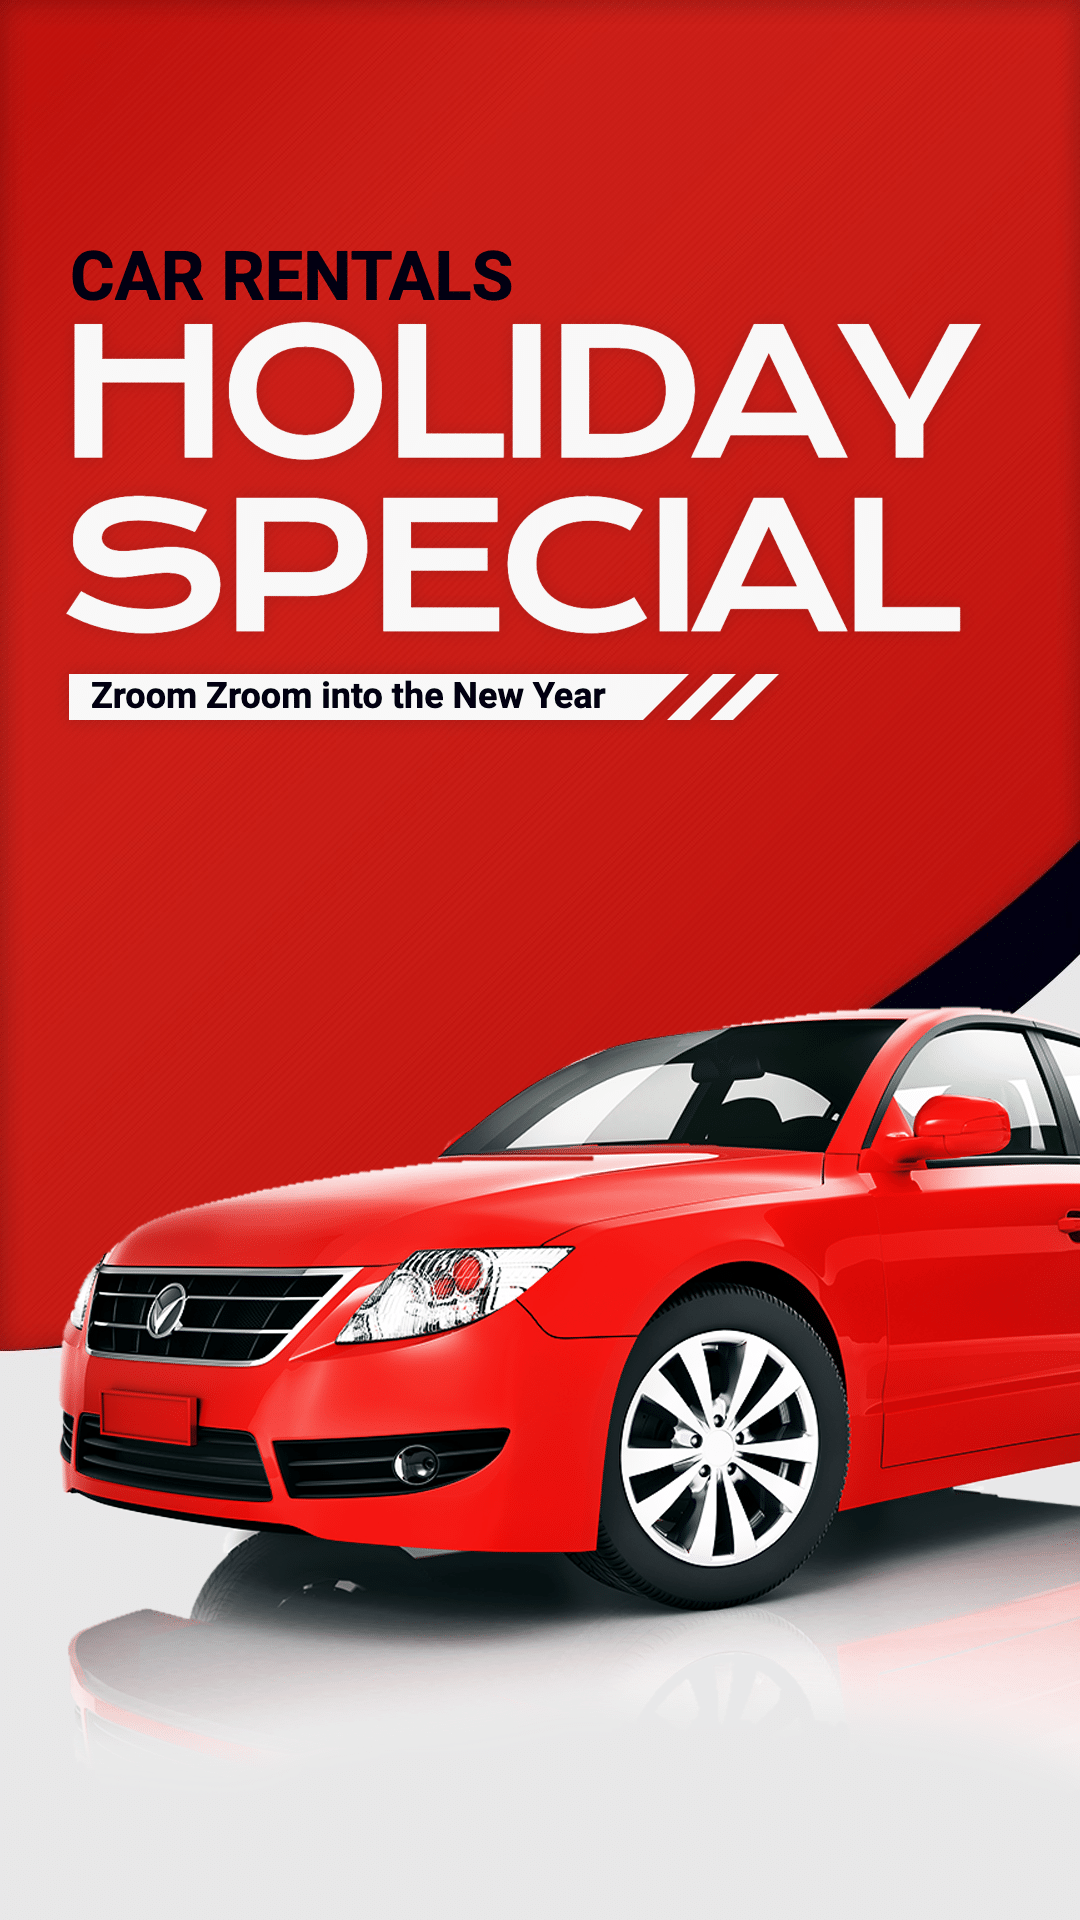 Car Rentals Holiday Special Promotion Ecommerce Story